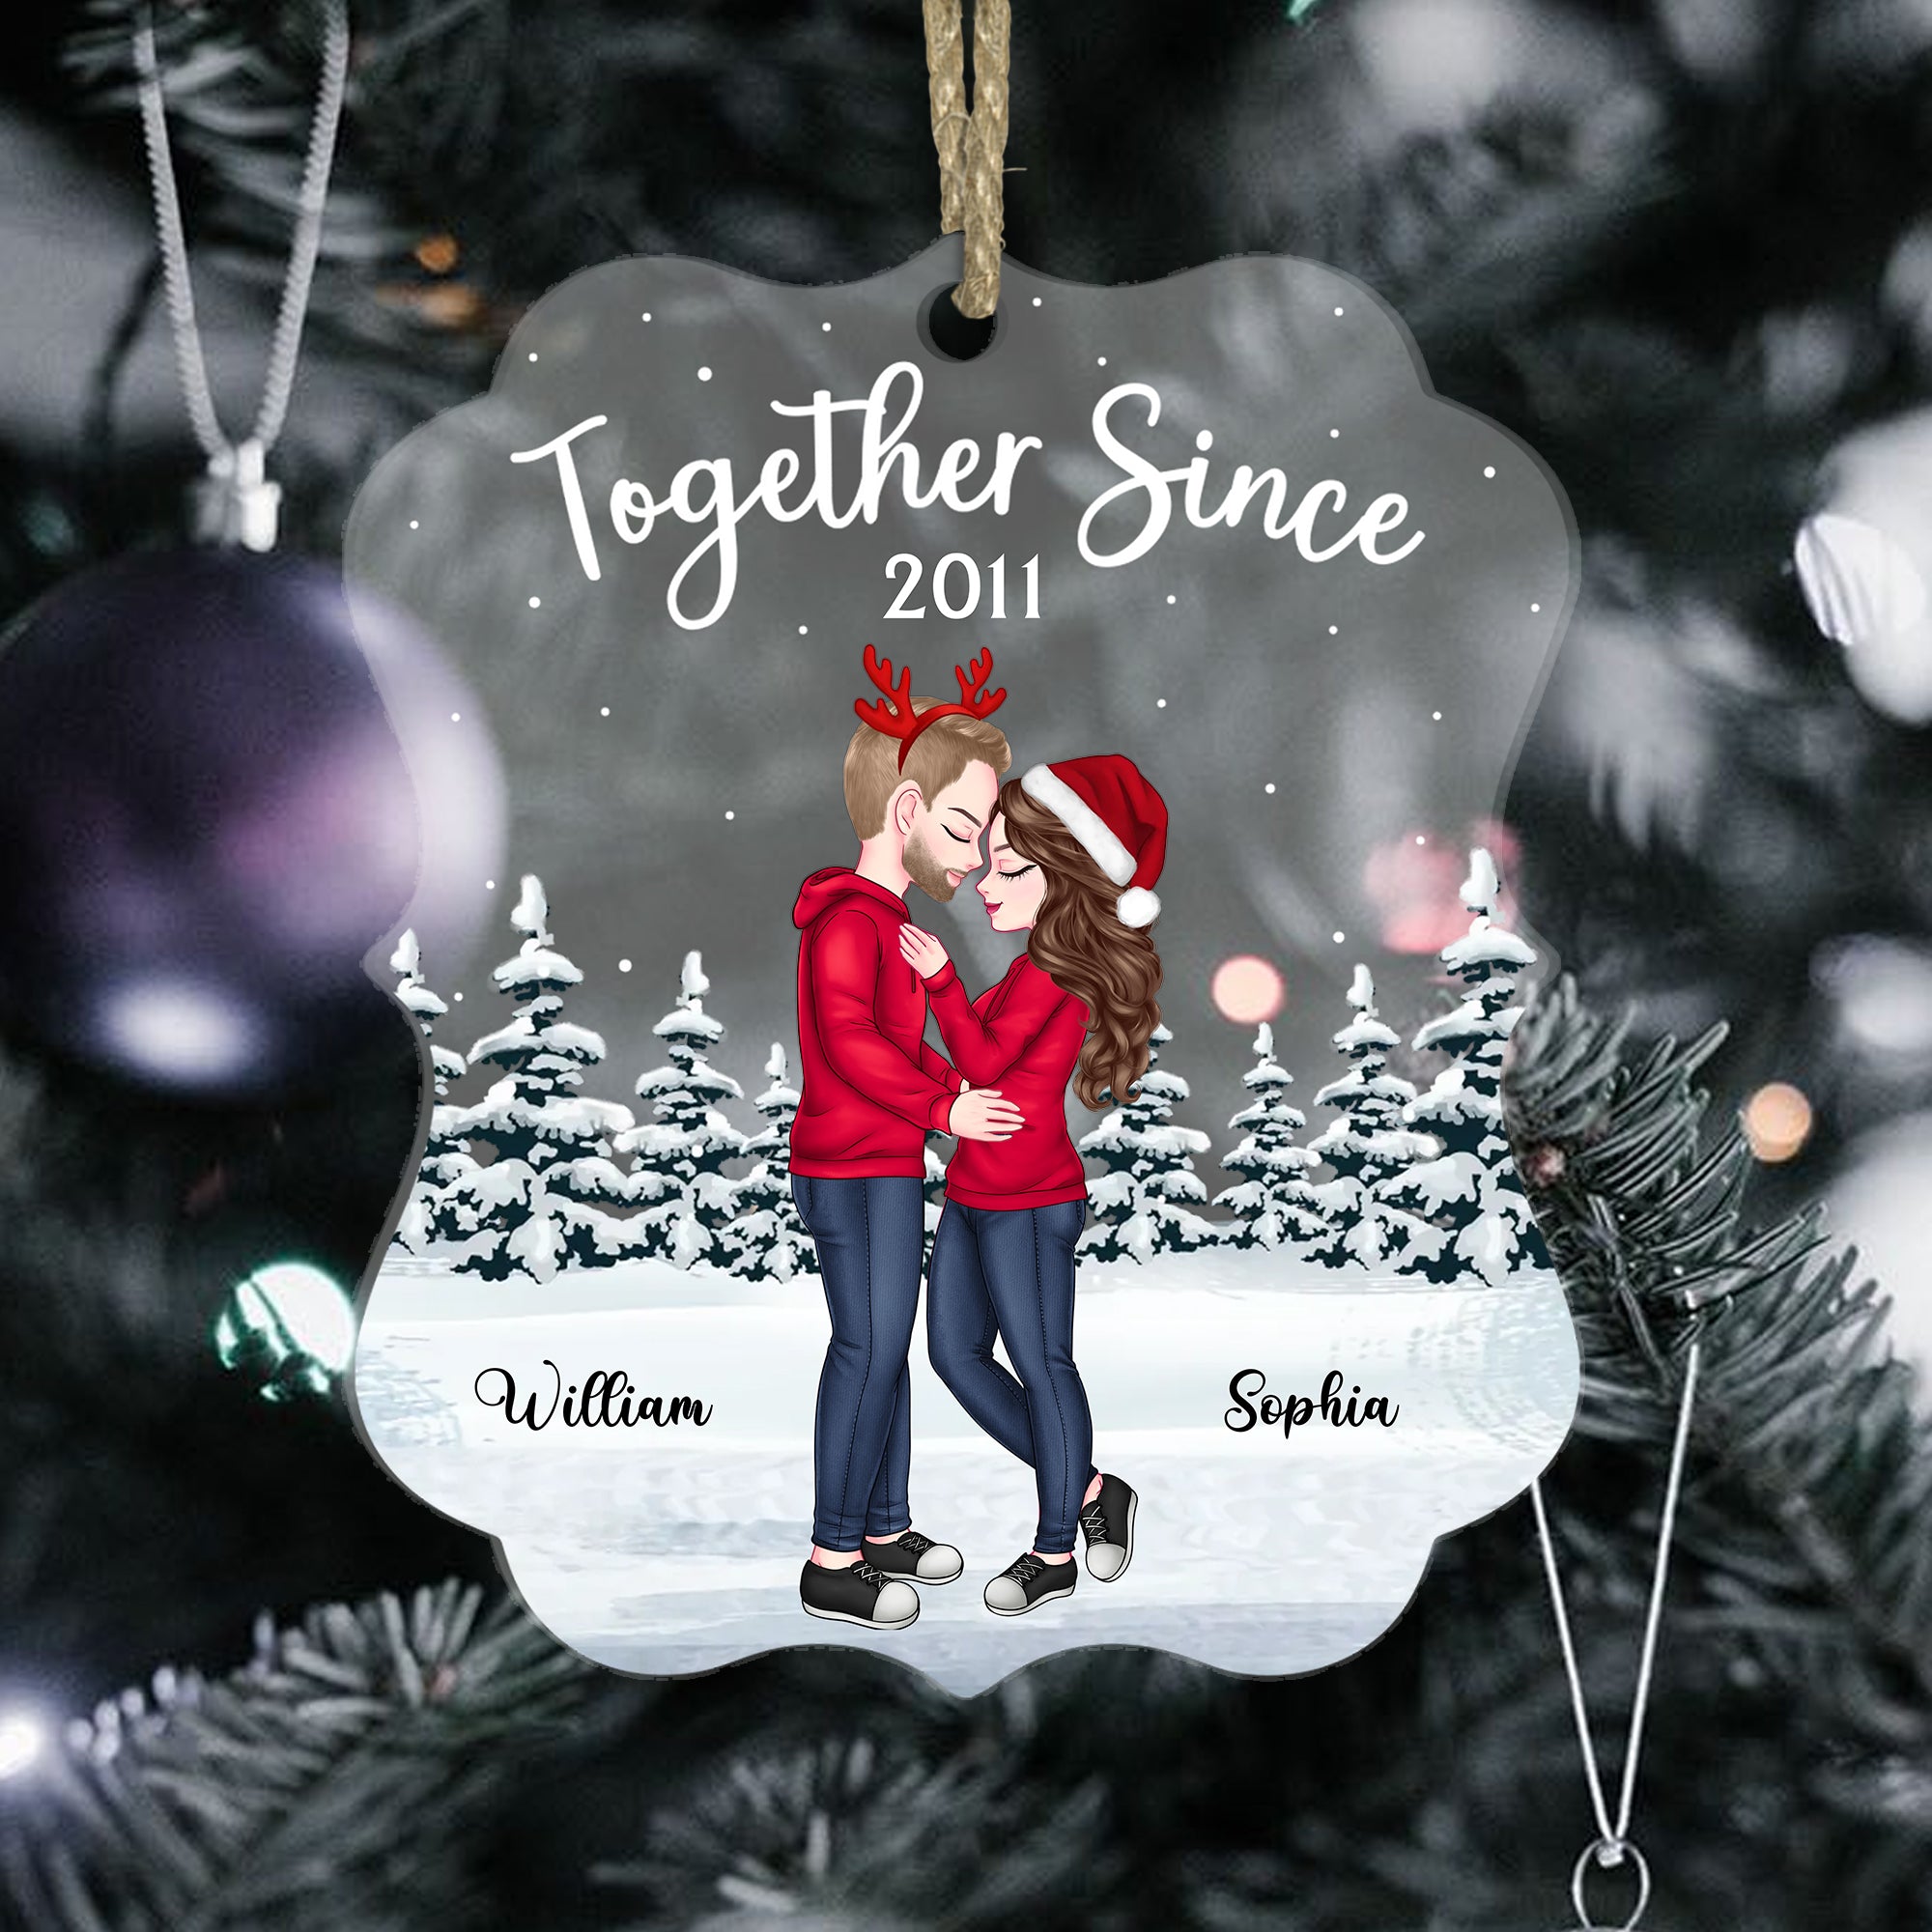 Together Since - Couple Ornament - Custom Appearance, Personalized Acrylic Ornament - Gift For Christmas, Couple Gift, Family Gift